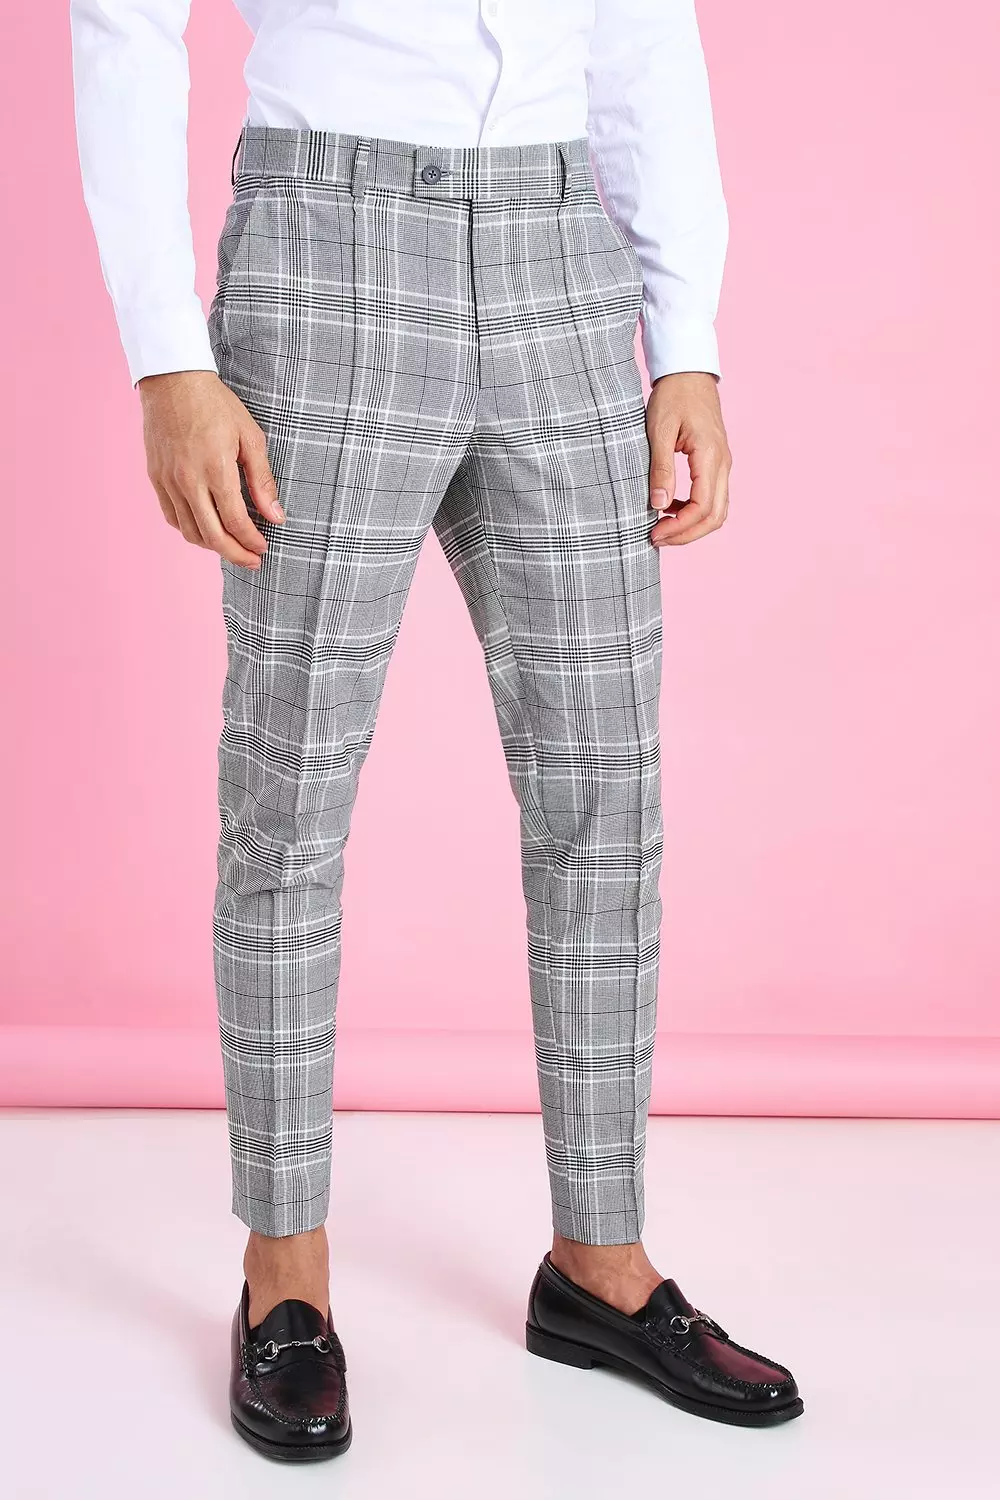 Black Skinny Tapered Smart Plaid Pants with Pintuck